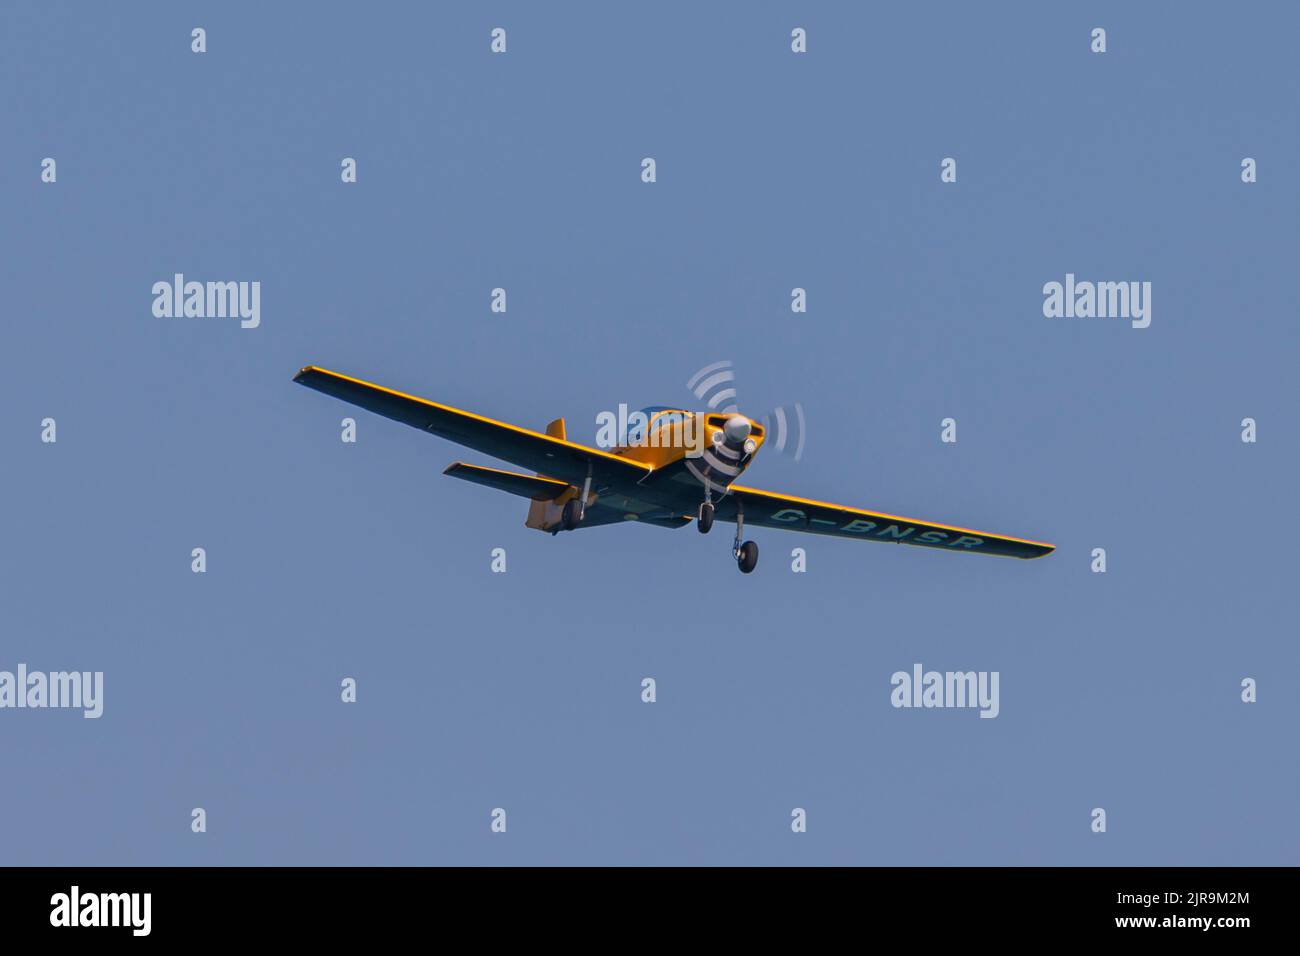 Firefly, Slingsby T67M-160 Stock Photo